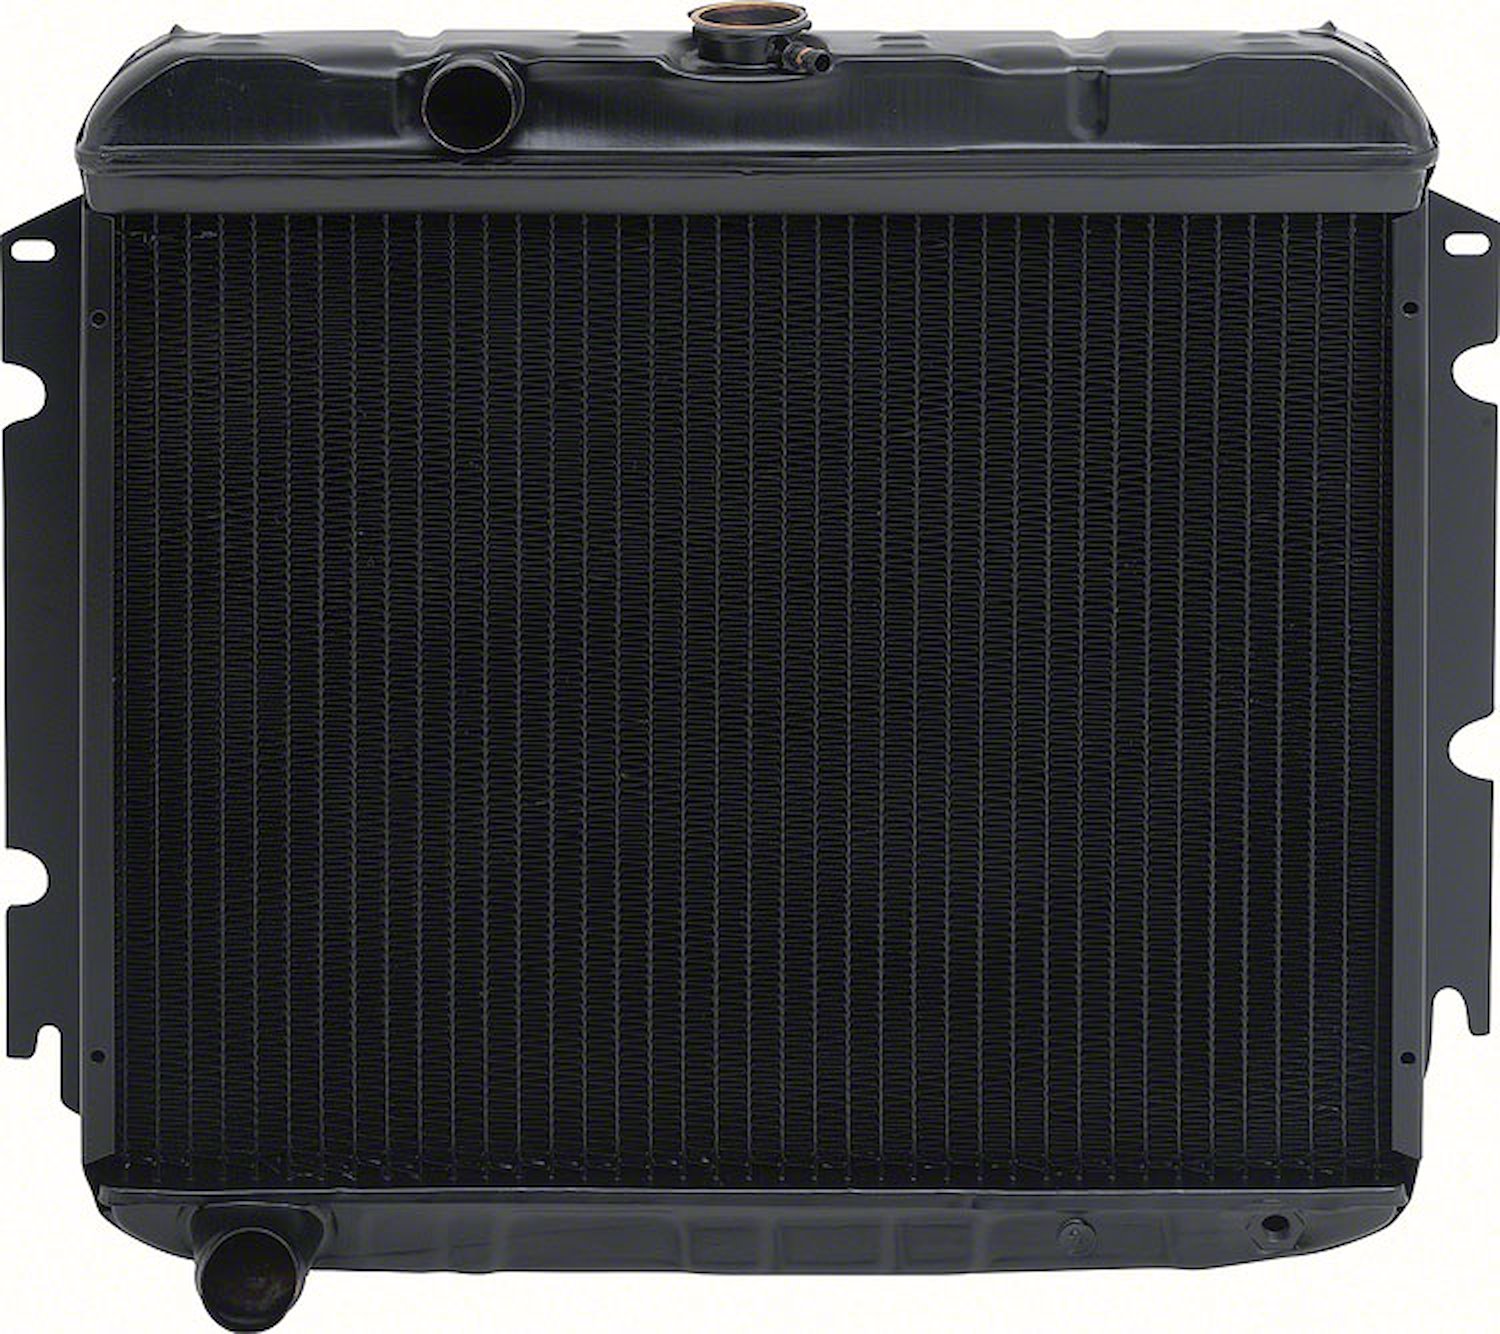 MA2247S Replacement Radiator 1967-69 Mopar A-Body Big Block V8 With Standard Trans 3 Row